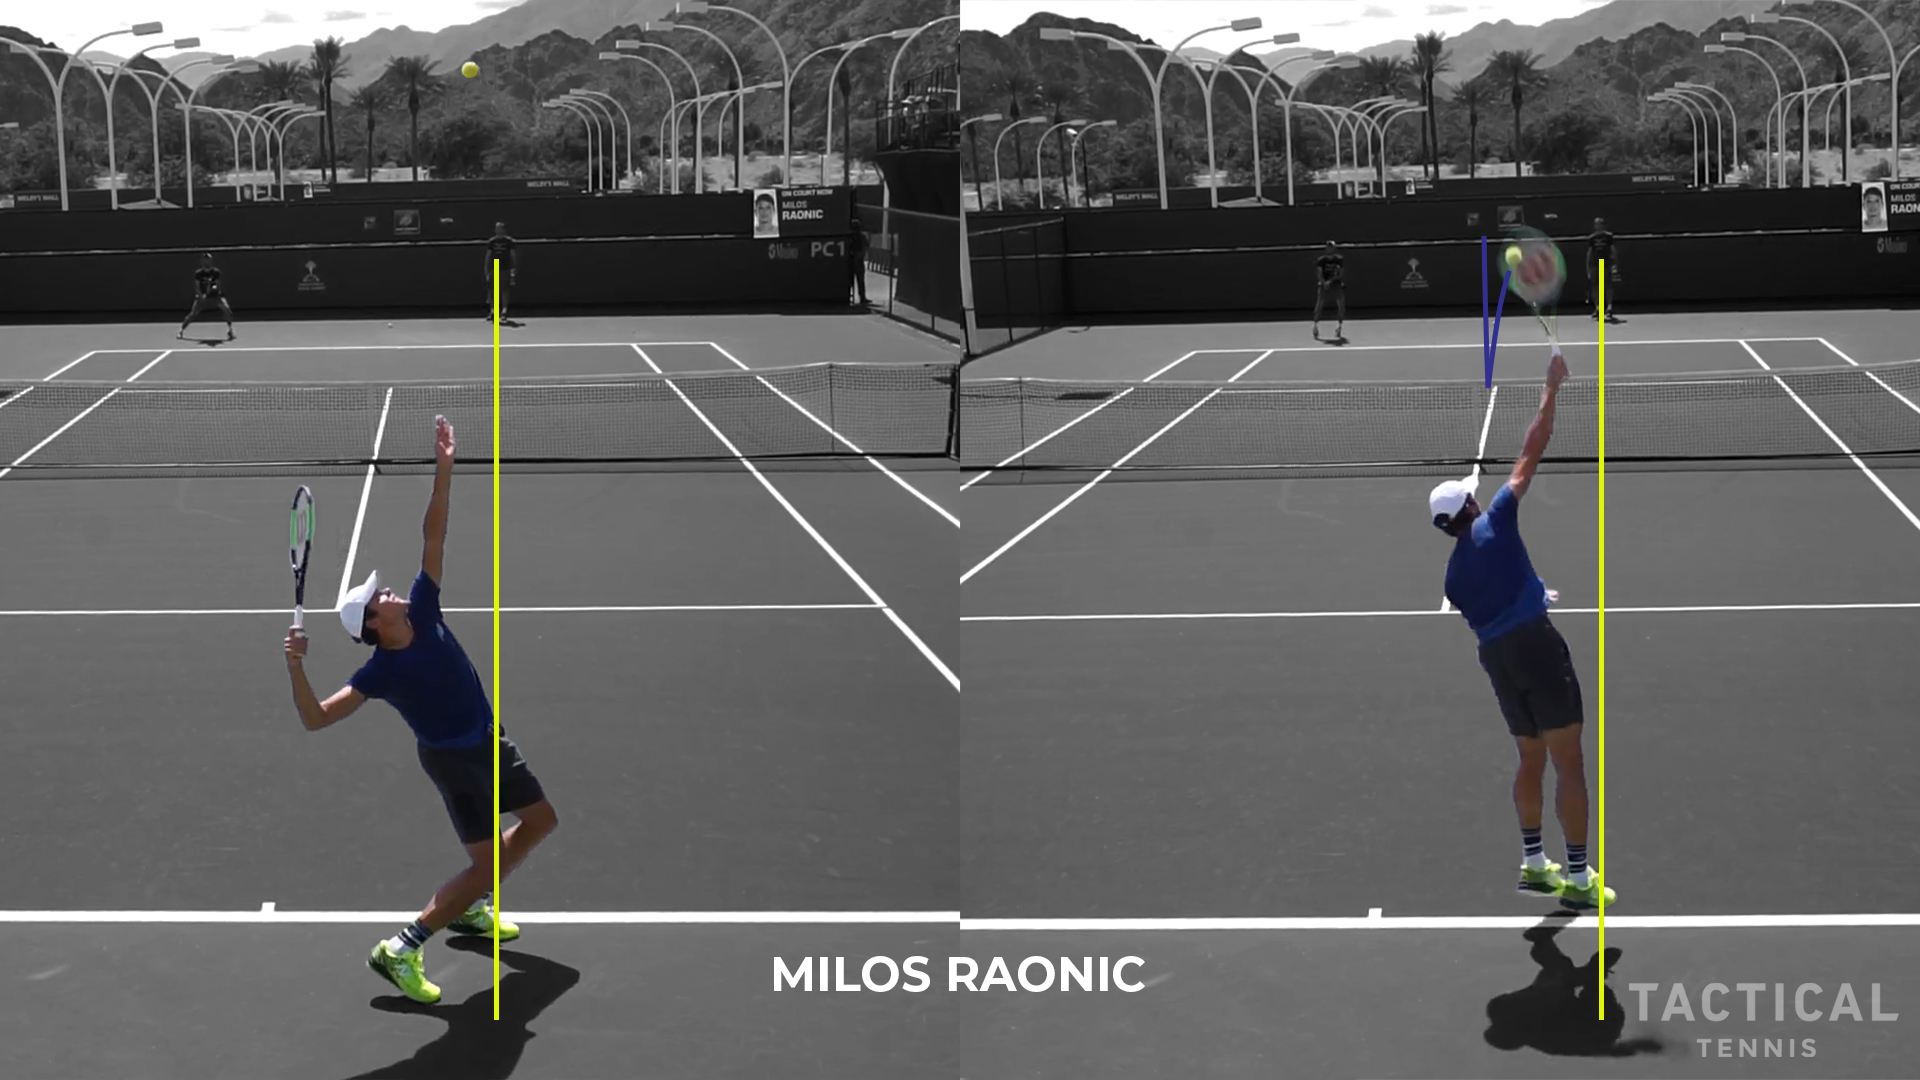 Raonic ball position at contact relative to trophy position